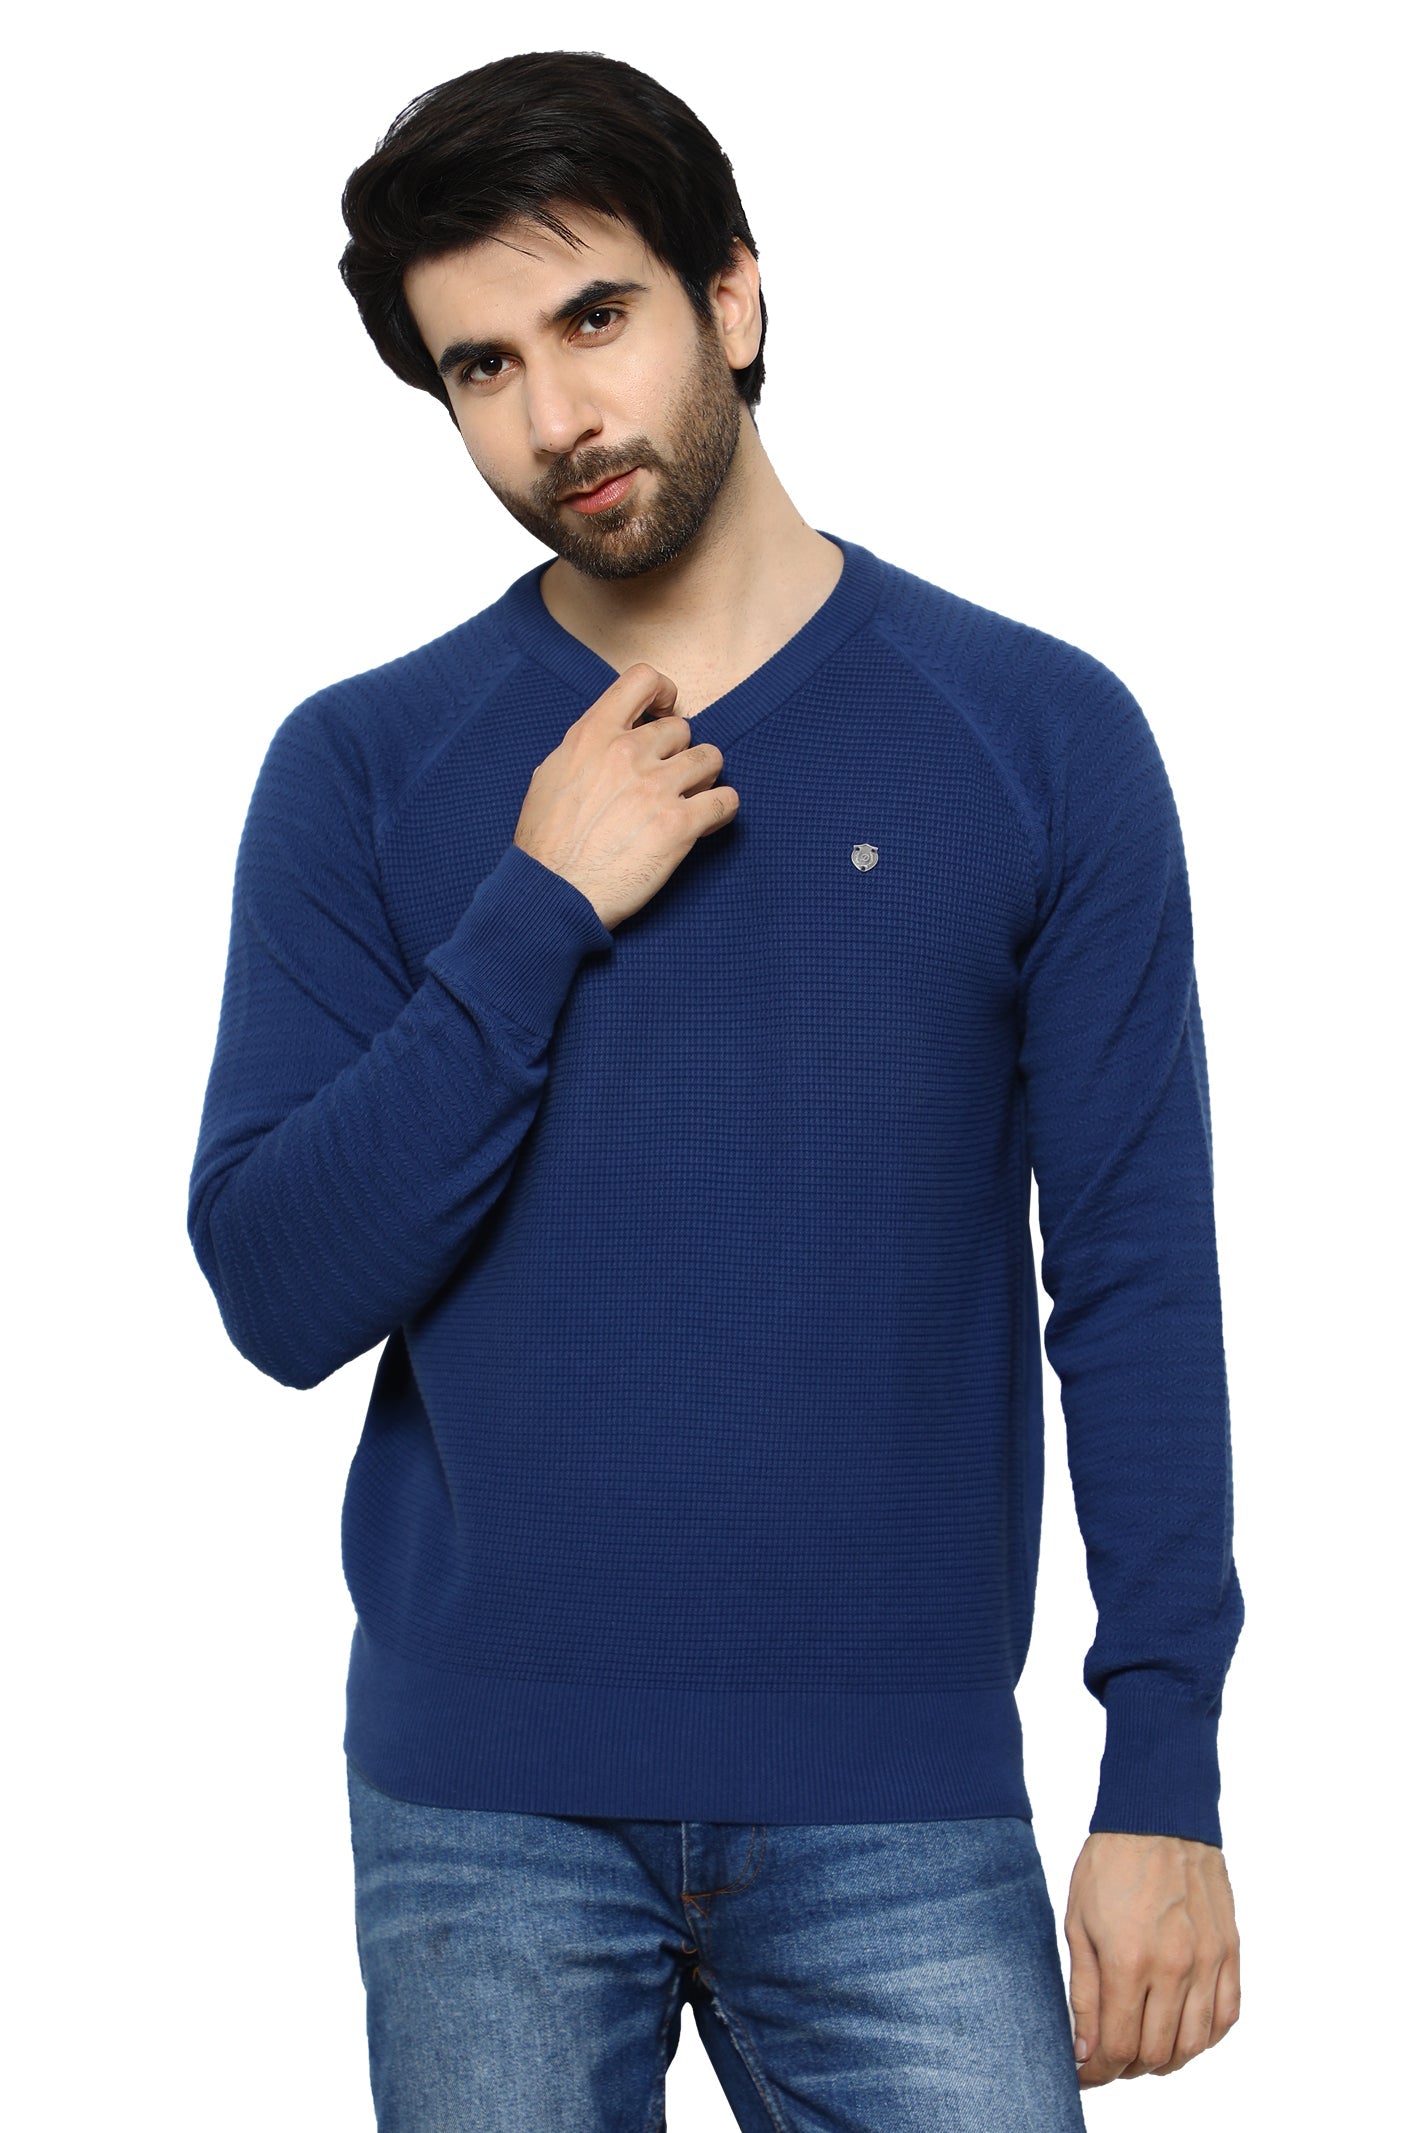 Sweater for Men's - Diners